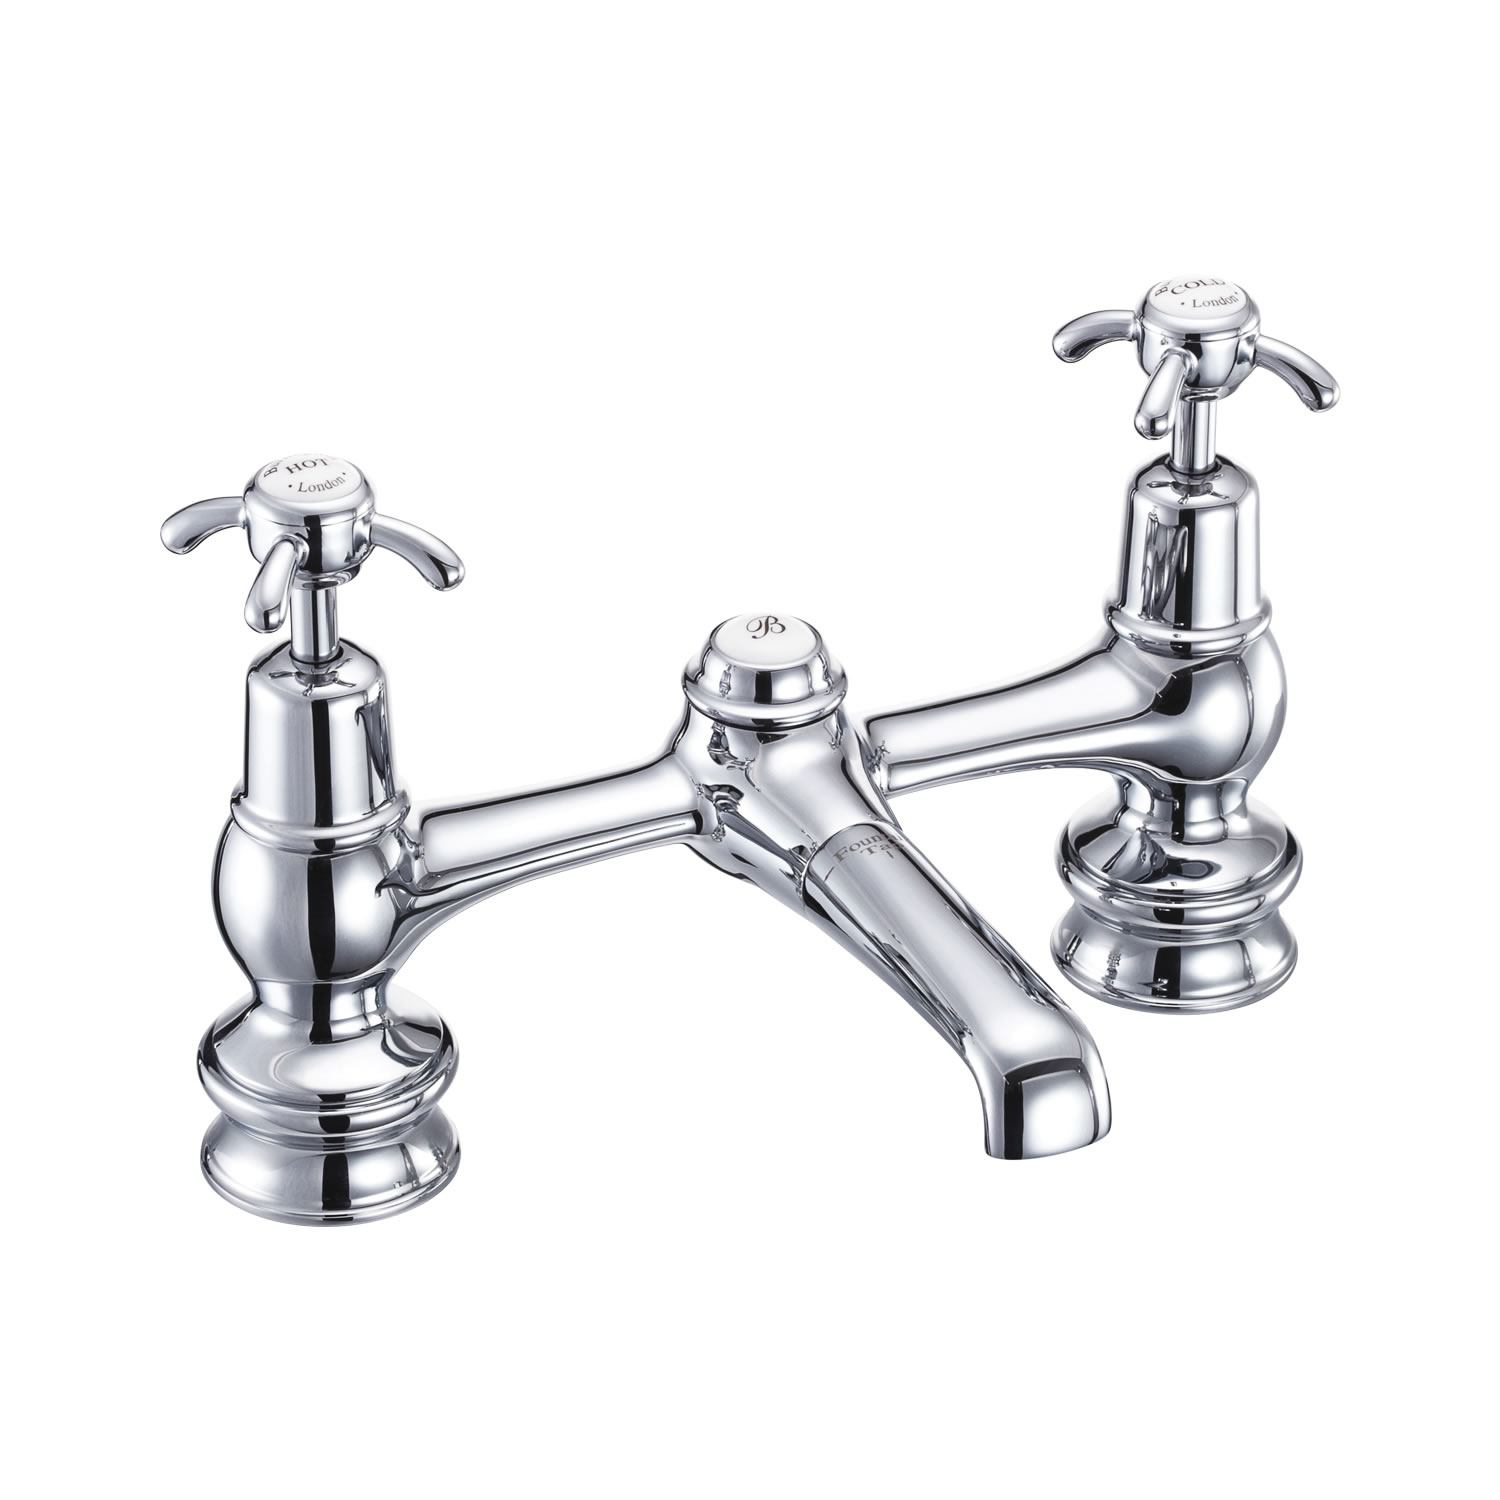 Anglesey Regent 2 tap hole bridge basin mixer with low central indice with plug and chain waste with swivel spout